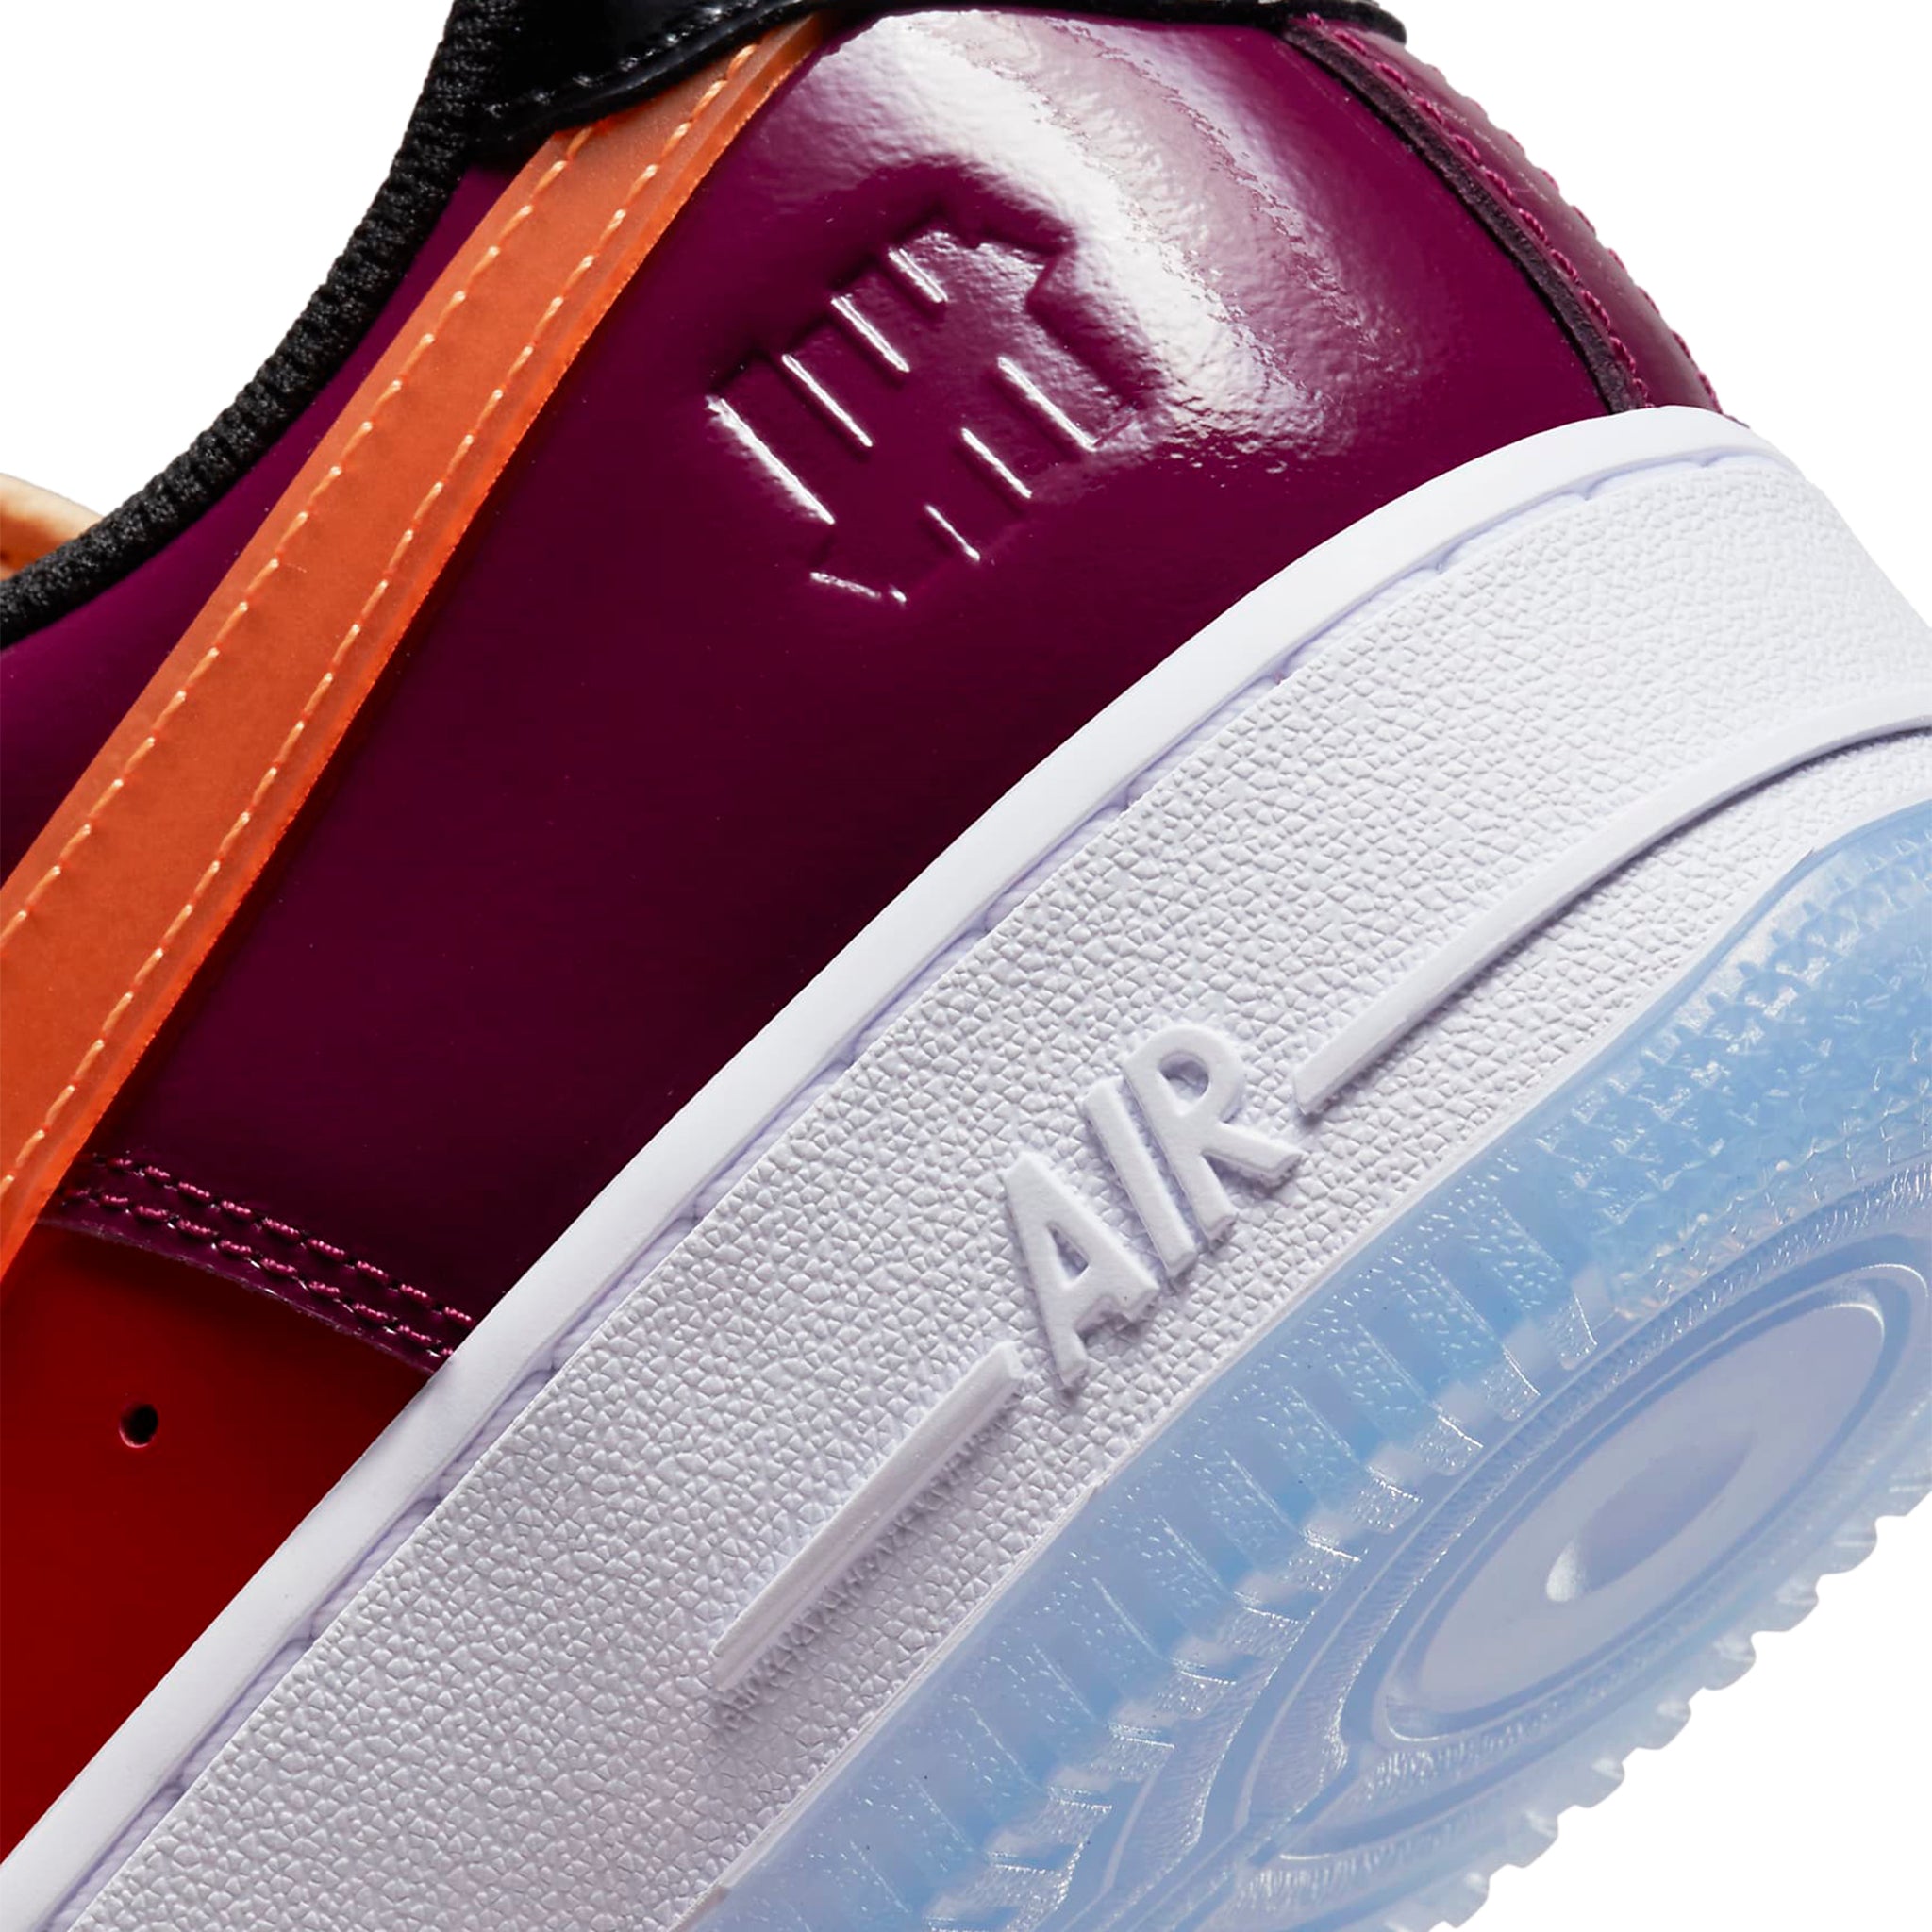 Heel view of Undefeated x Nike Air Force 1 Low Multi-Patent DV5255-400